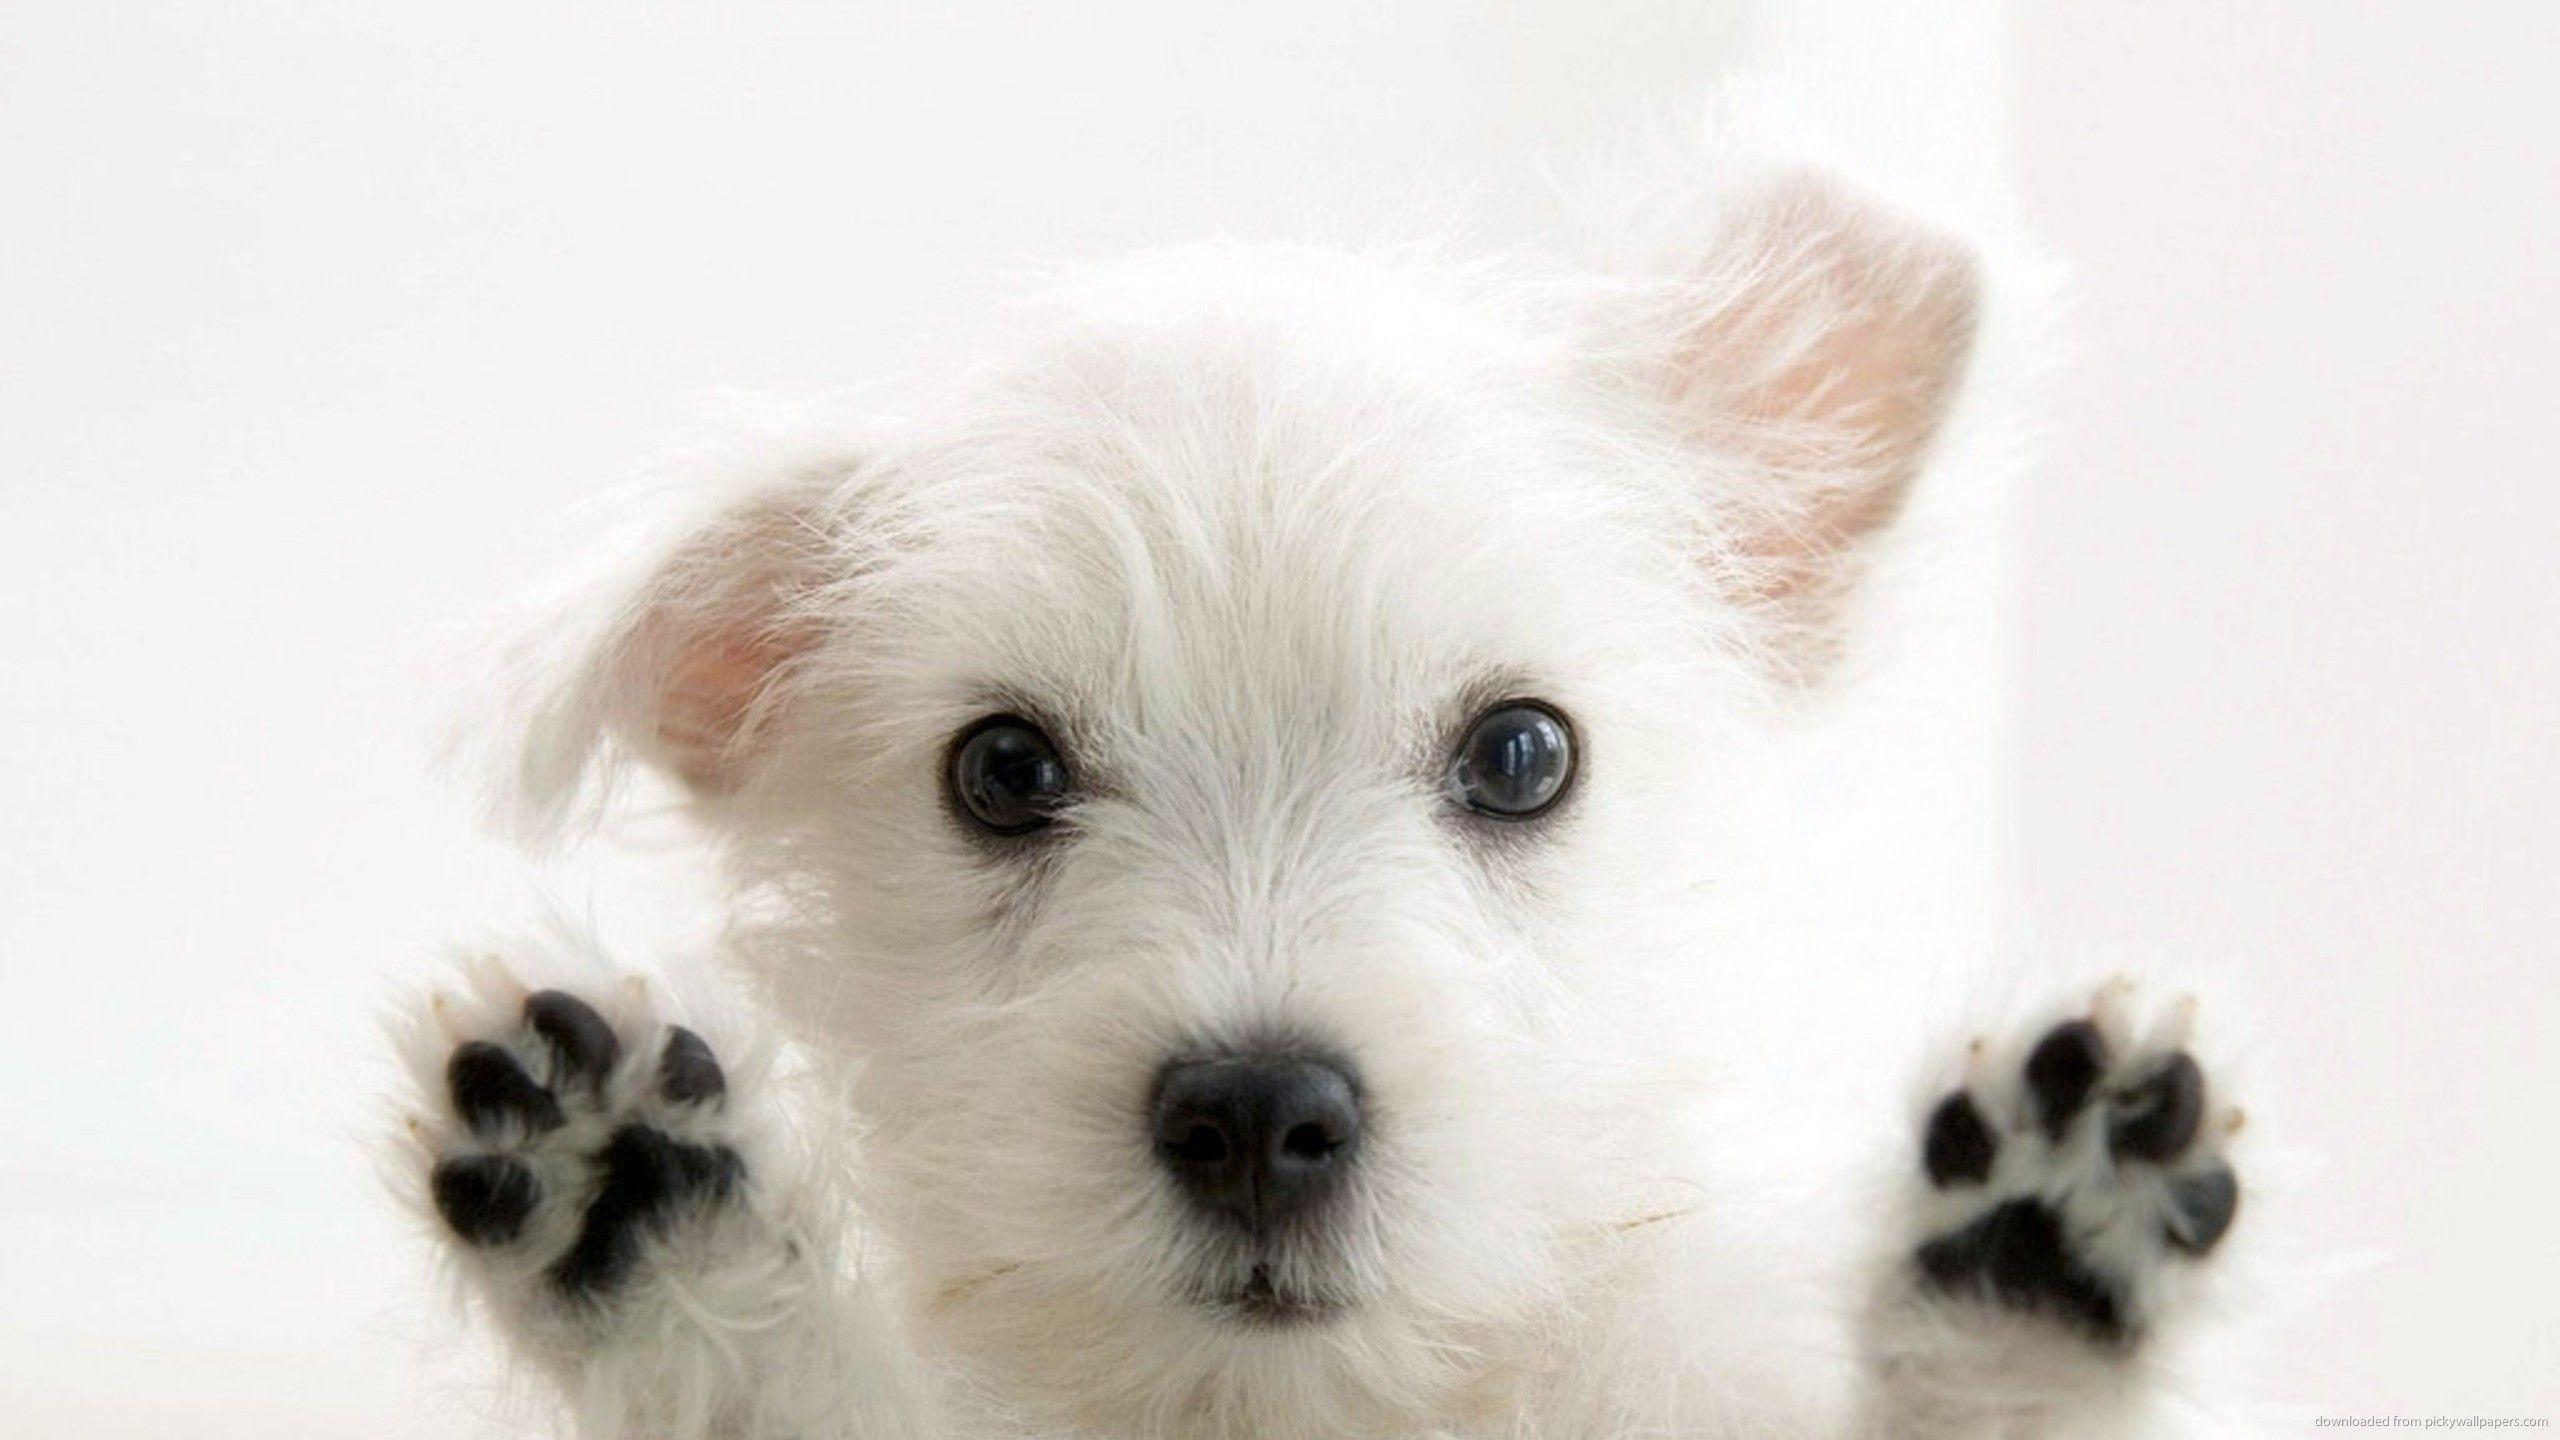 Black paws cute puppy download free HD pet wallpaper. High